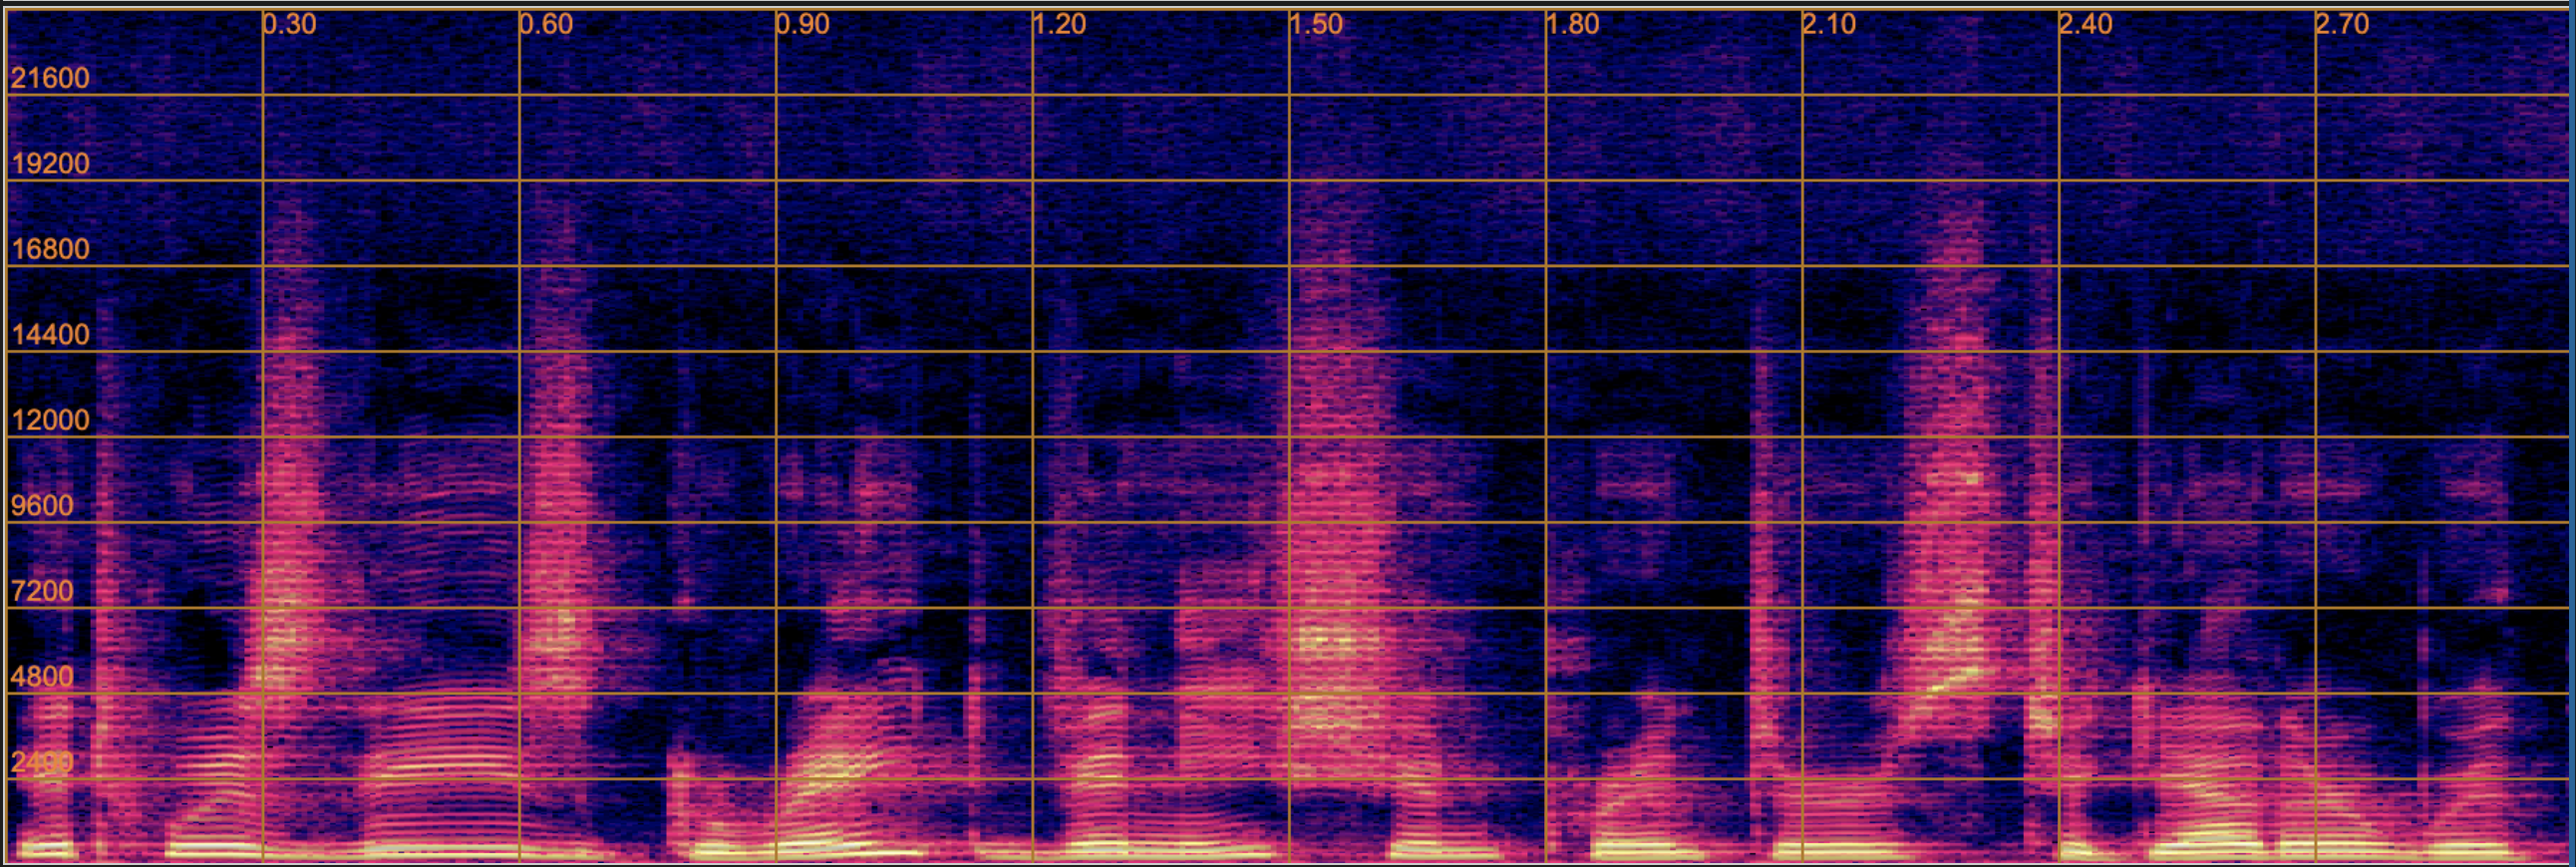 spectrogram of 48 kHz speech up-sampled with Dual-CycleGAN